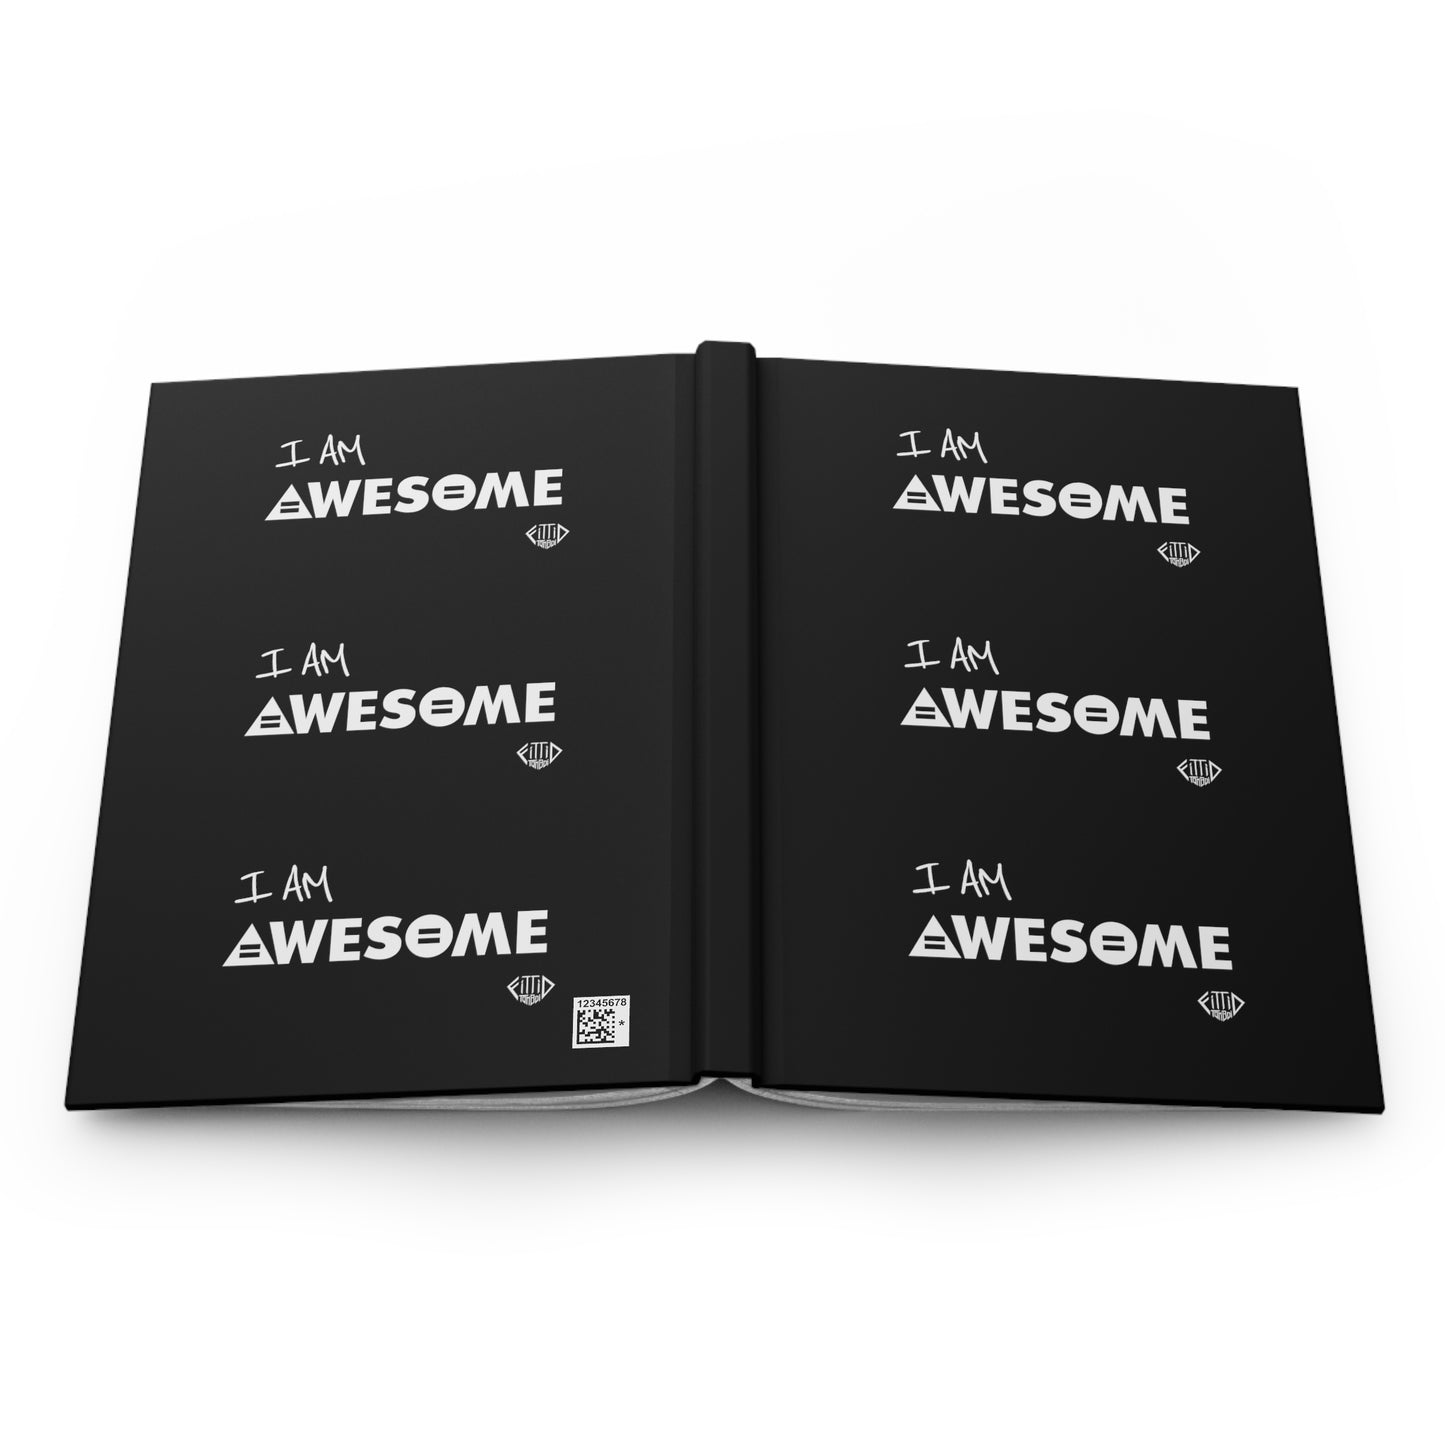 I AM AWESOME Journal Hardcover - Black